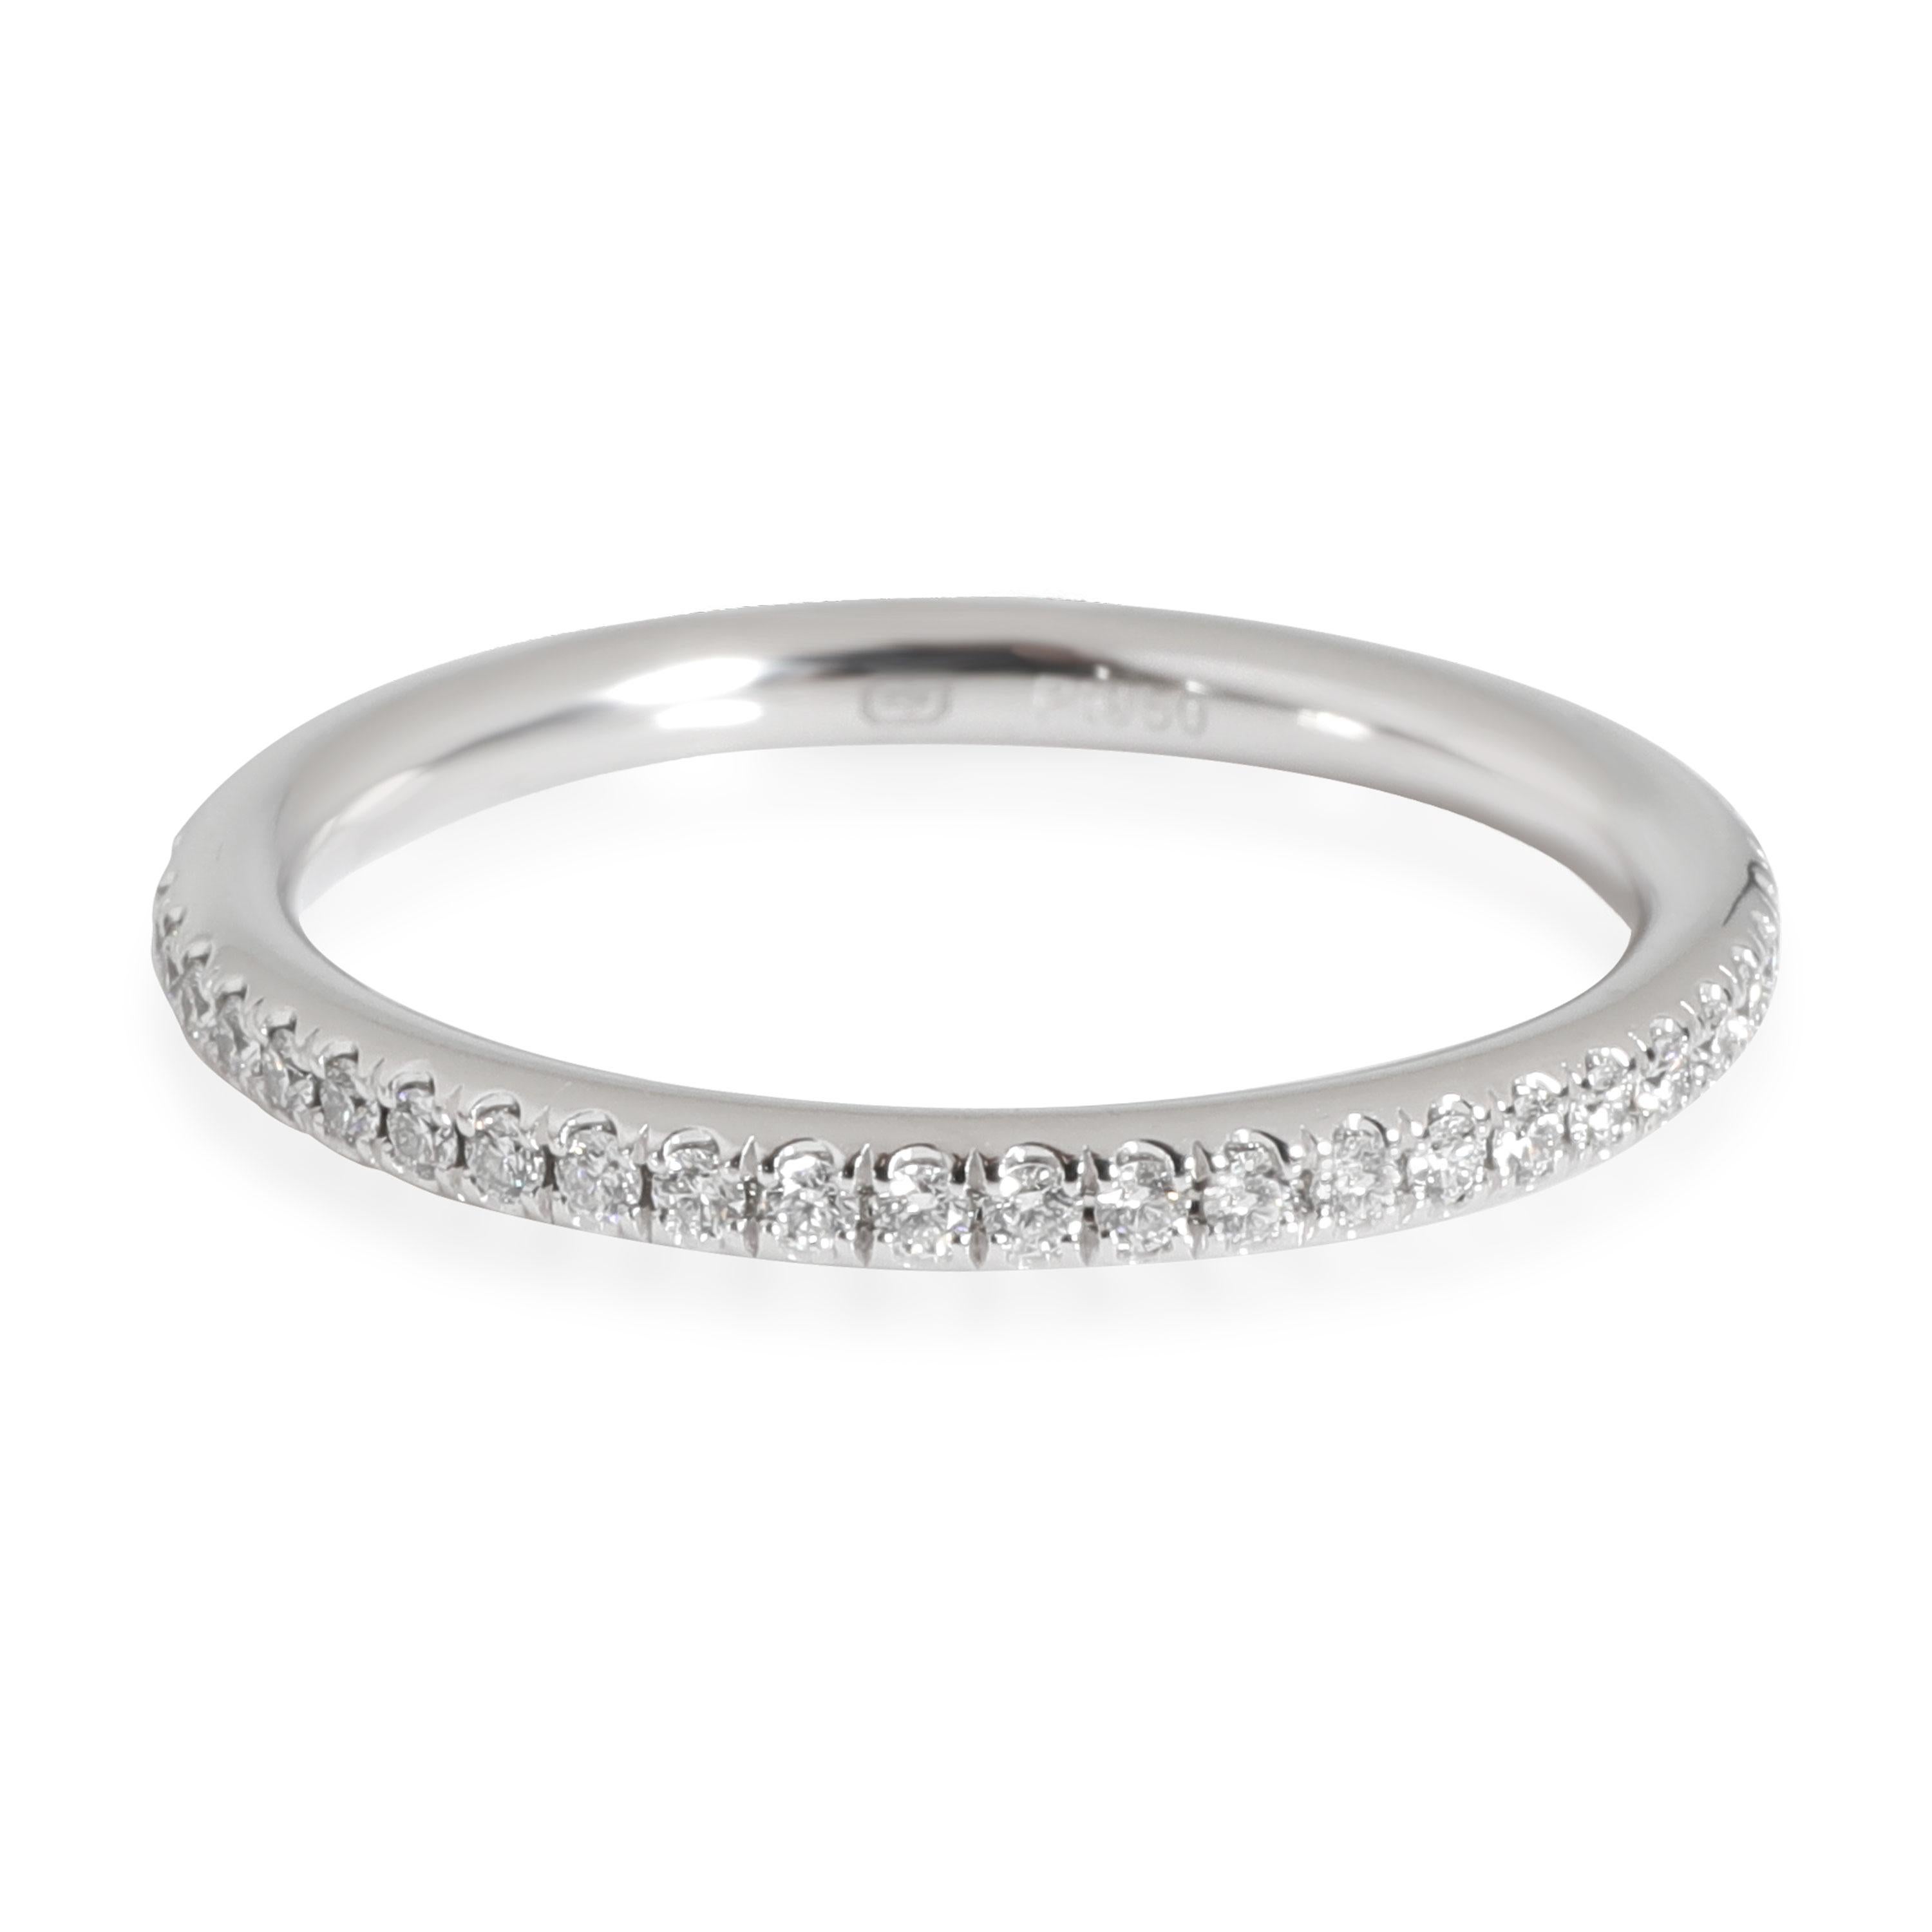 Harry Winston Diamond Wedding Band in Platinum 0.27 CTW

PRIMARY DETAILS
SKU: 116105
Listing Title: Harry Winston Diamond Wedding Band in Platinum 0.27 CTW
Condition Description: Retails for 6500 USD. In excellent condition and recently polished.